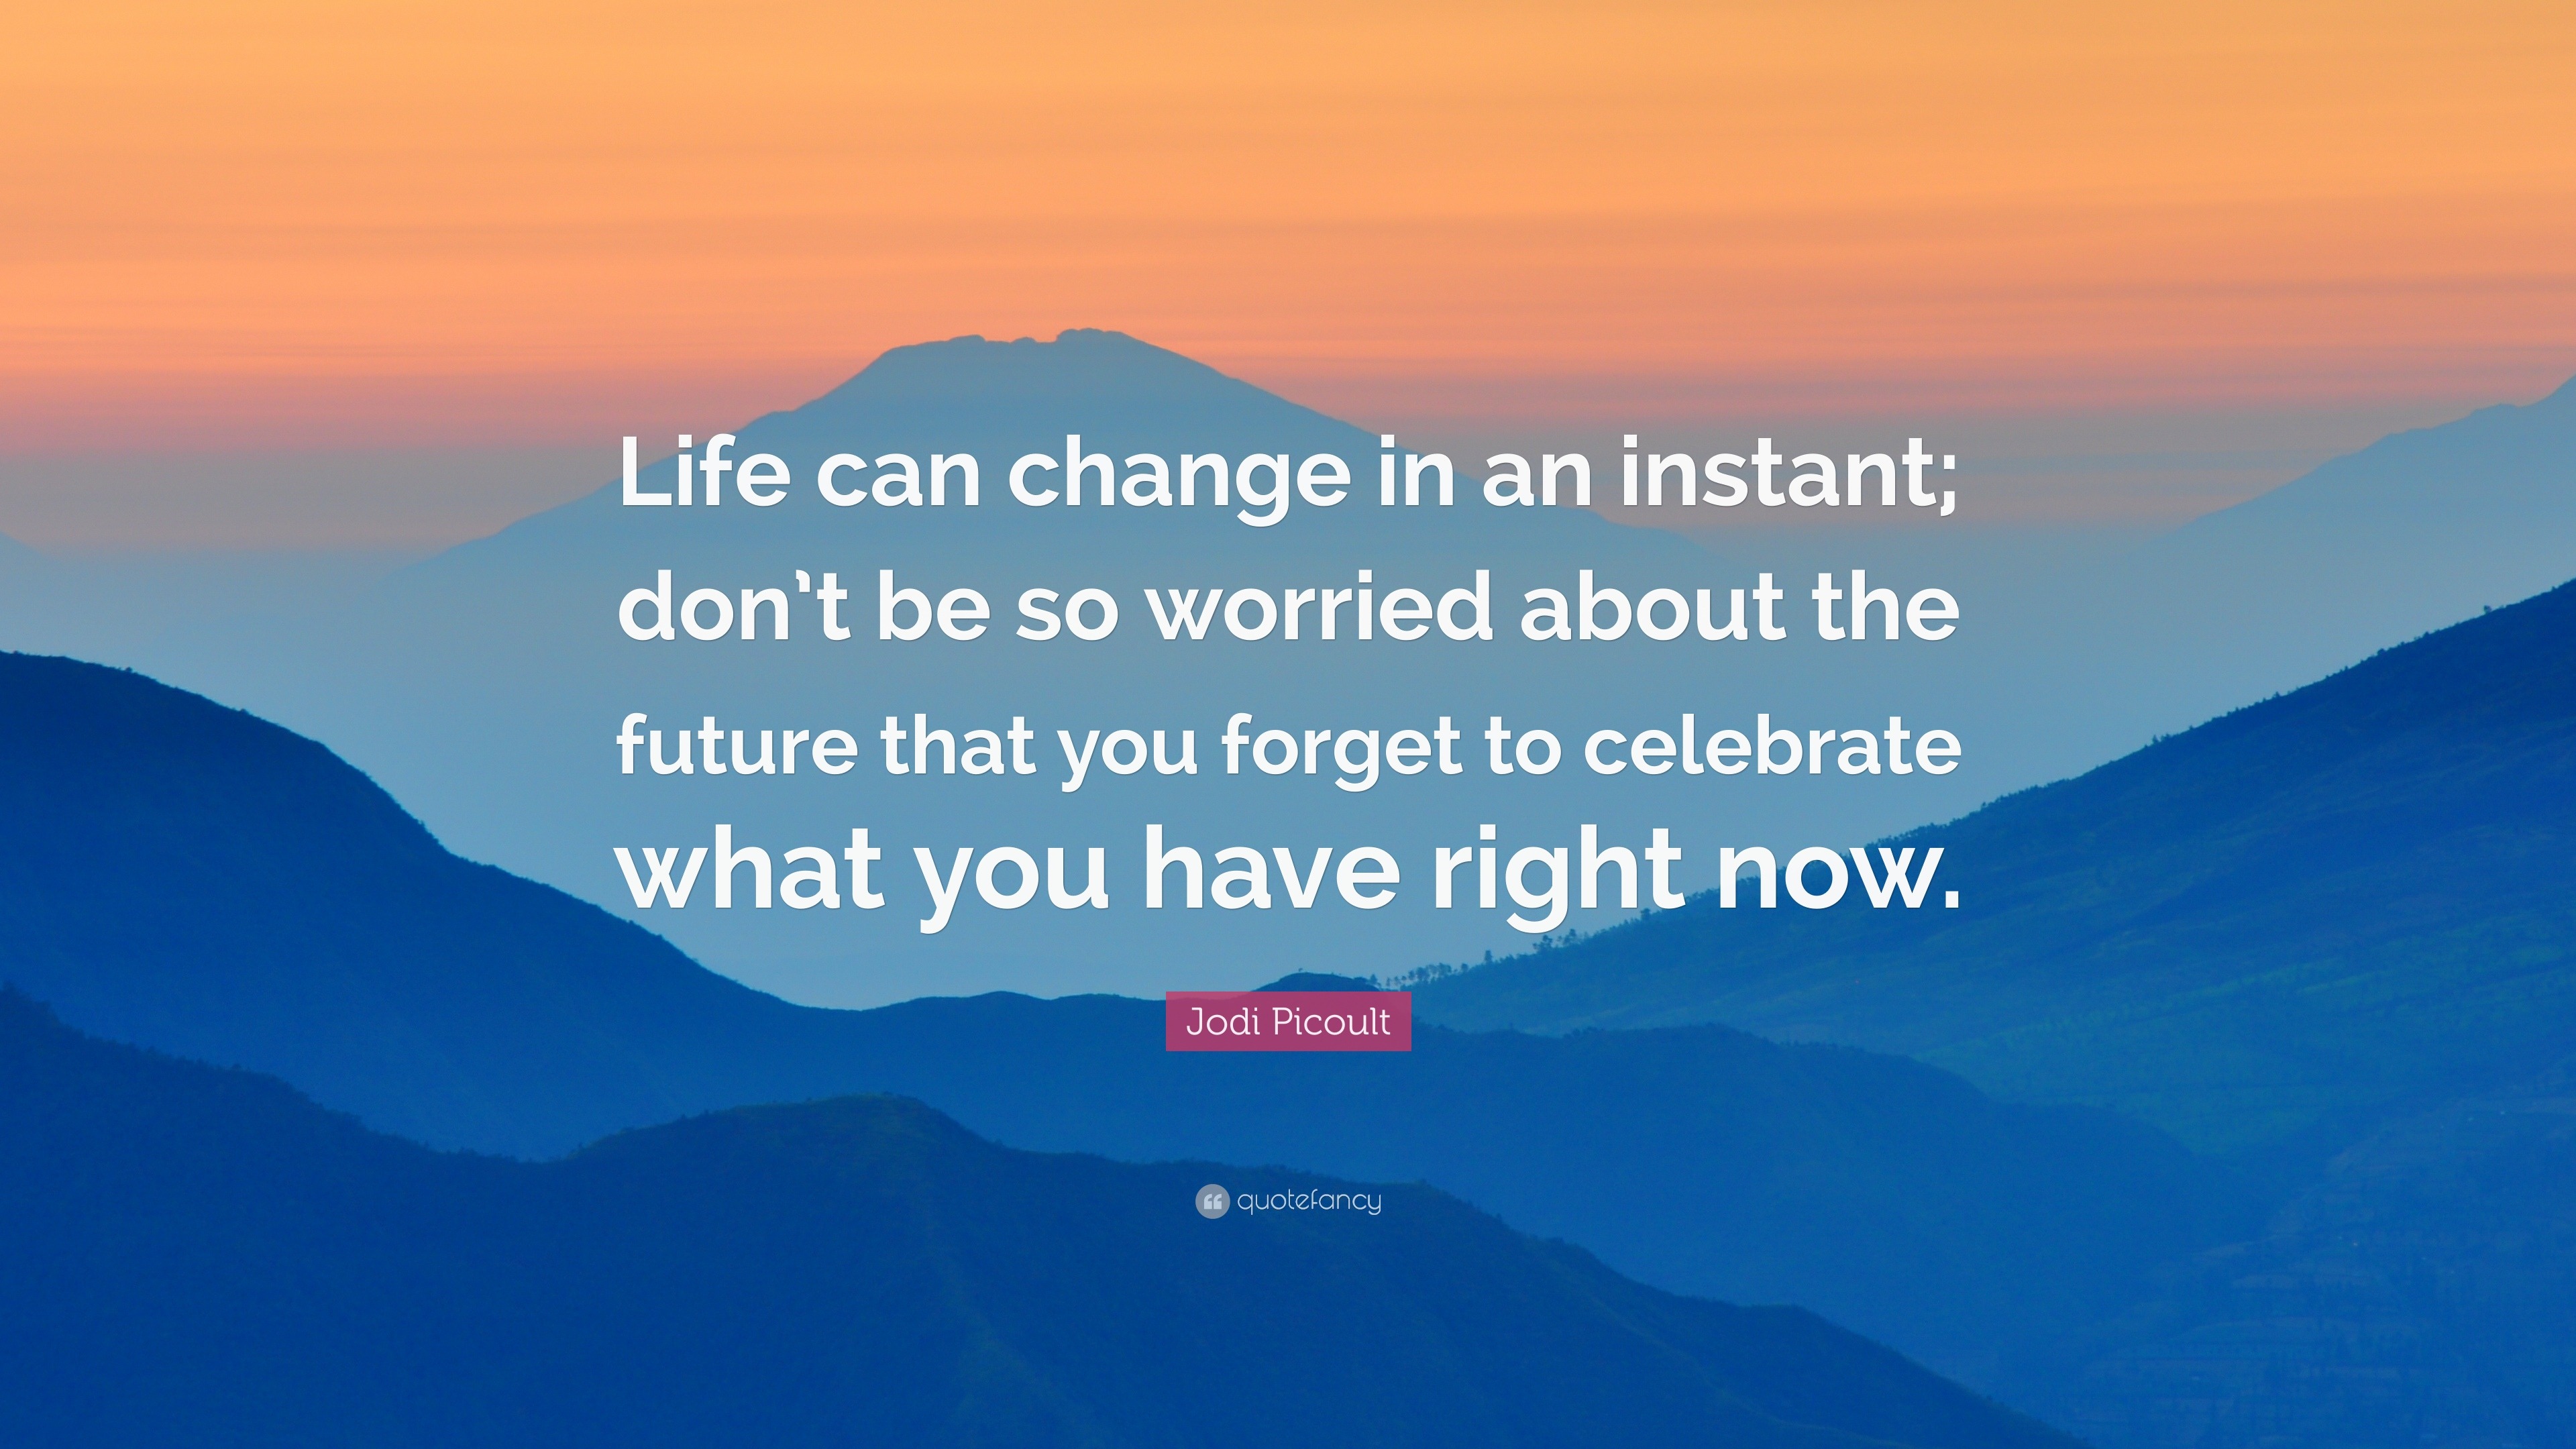 Quotes About Life Changing In An Instant